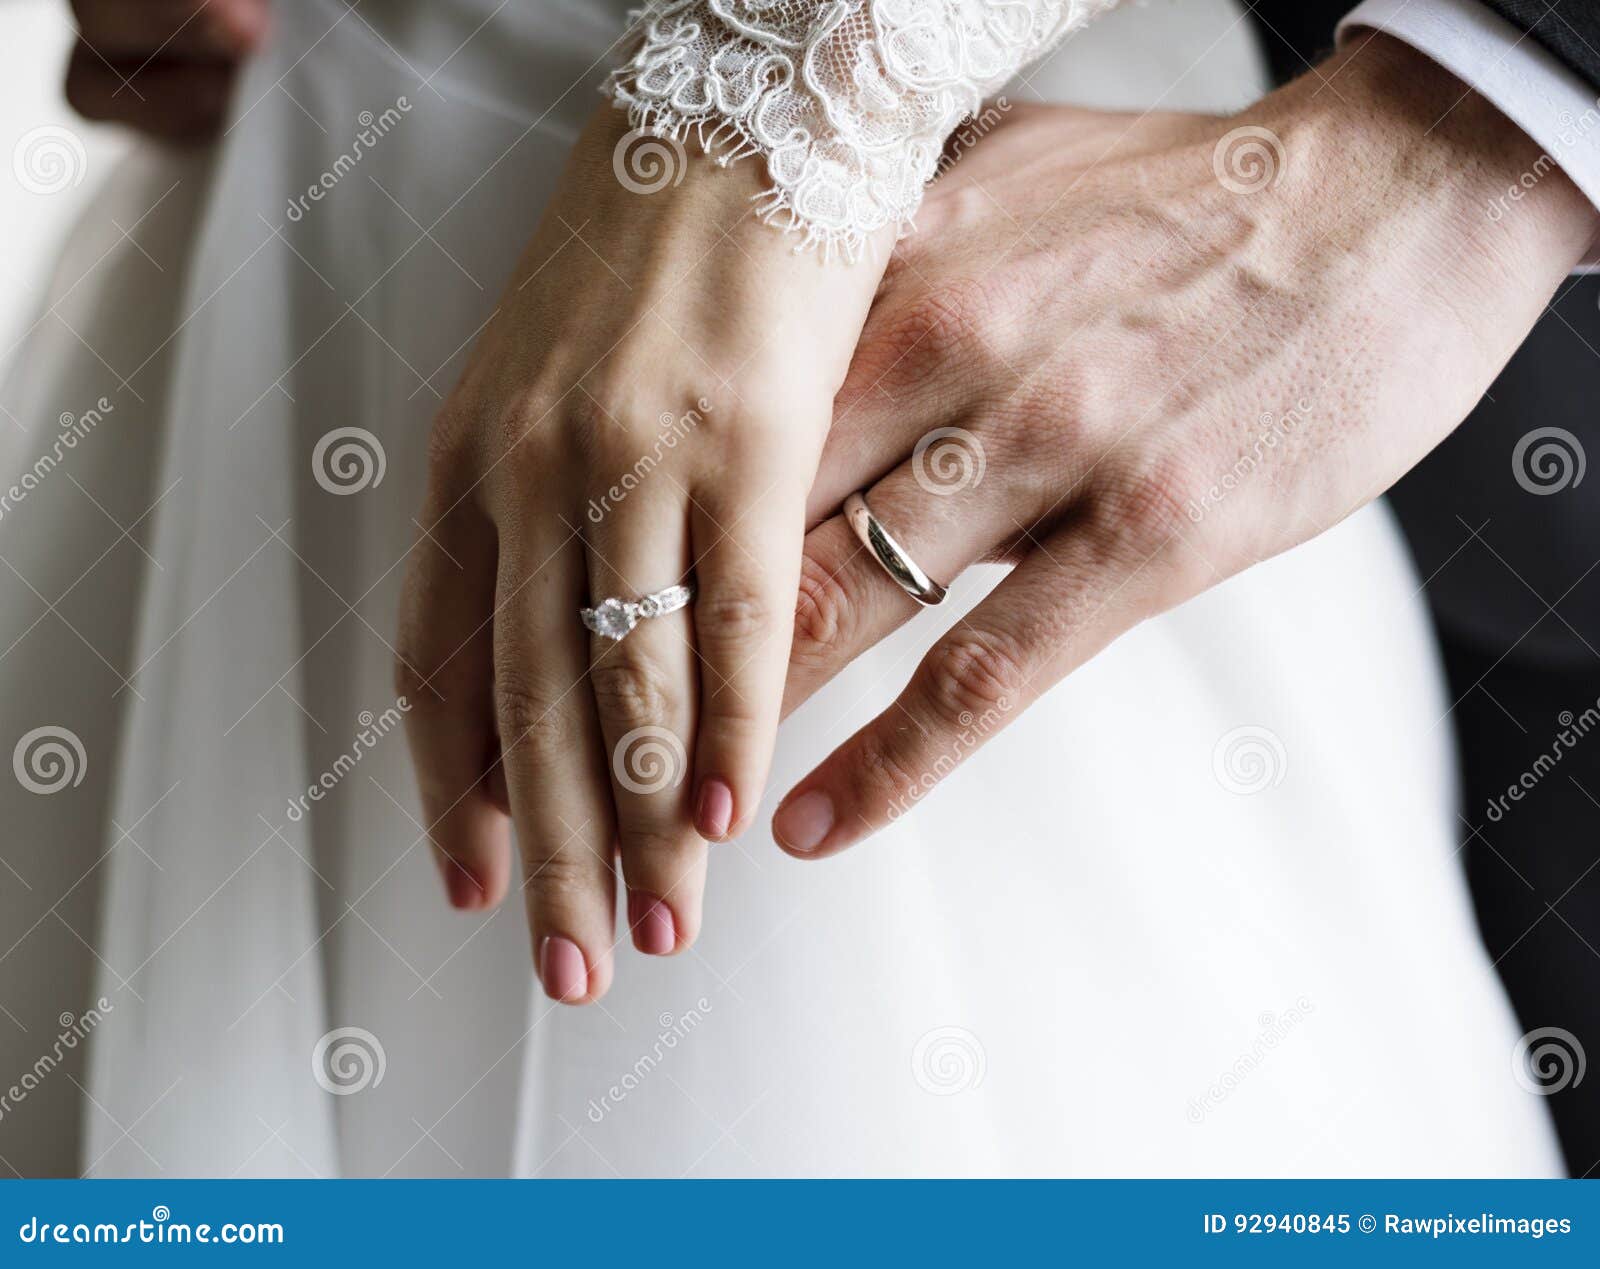 bride and groom showing their engagement wedding rings on hands